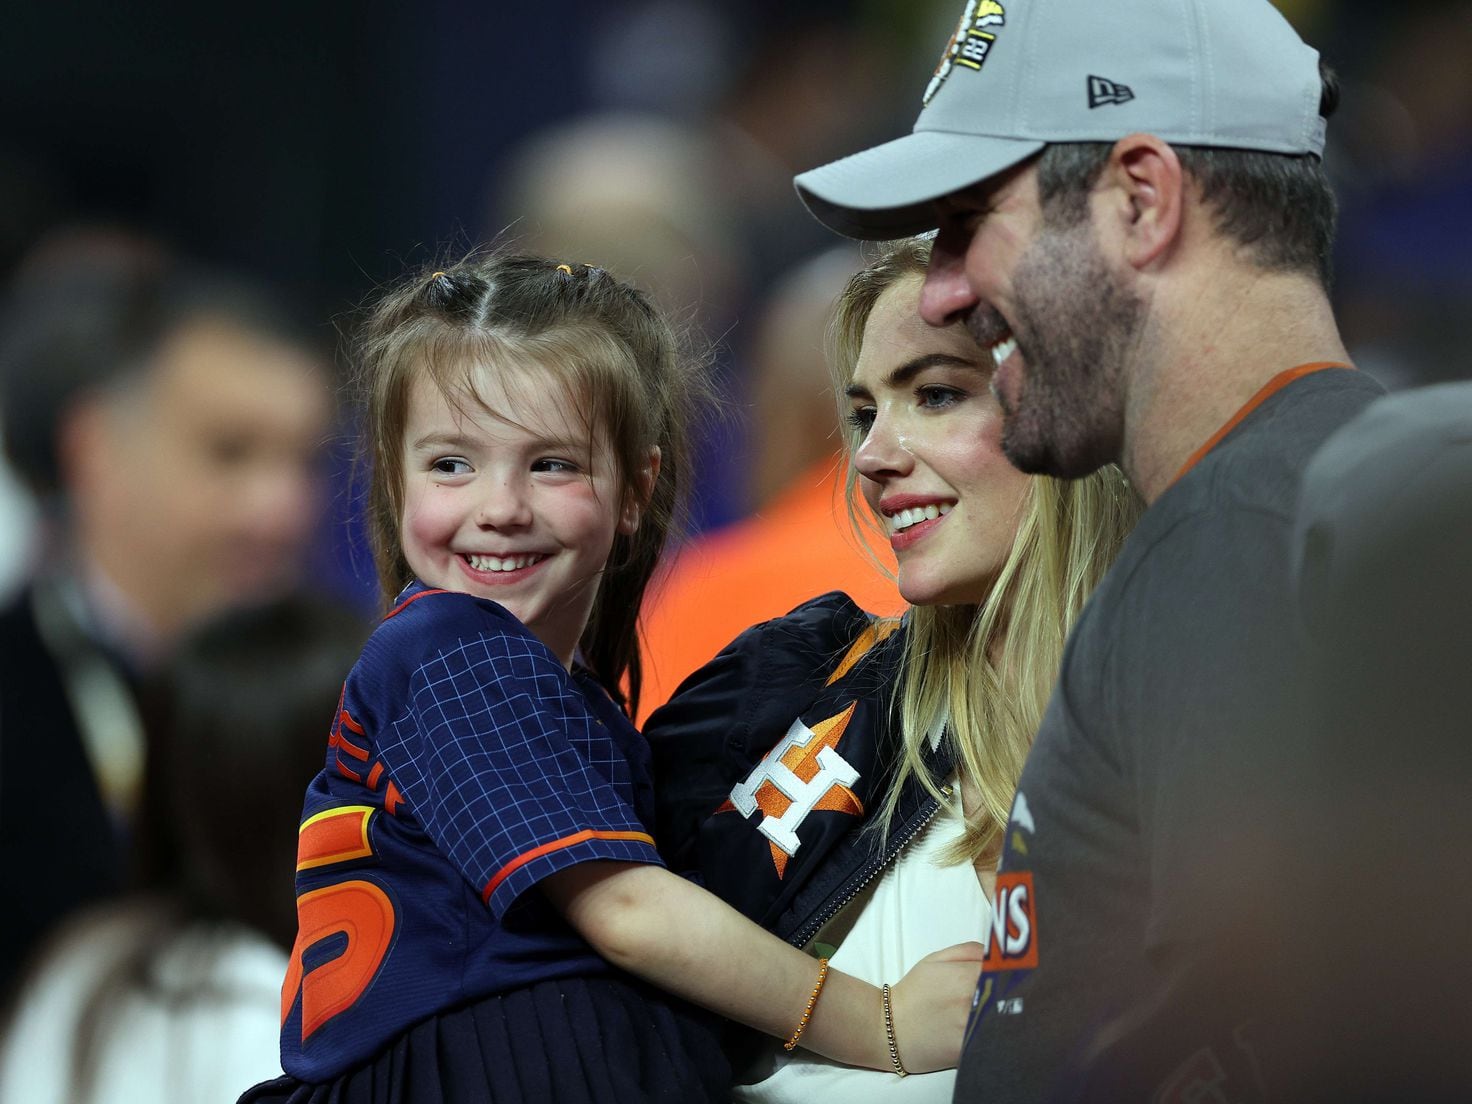 Where do the Dodgers stand with Justin Verlander and the rest of